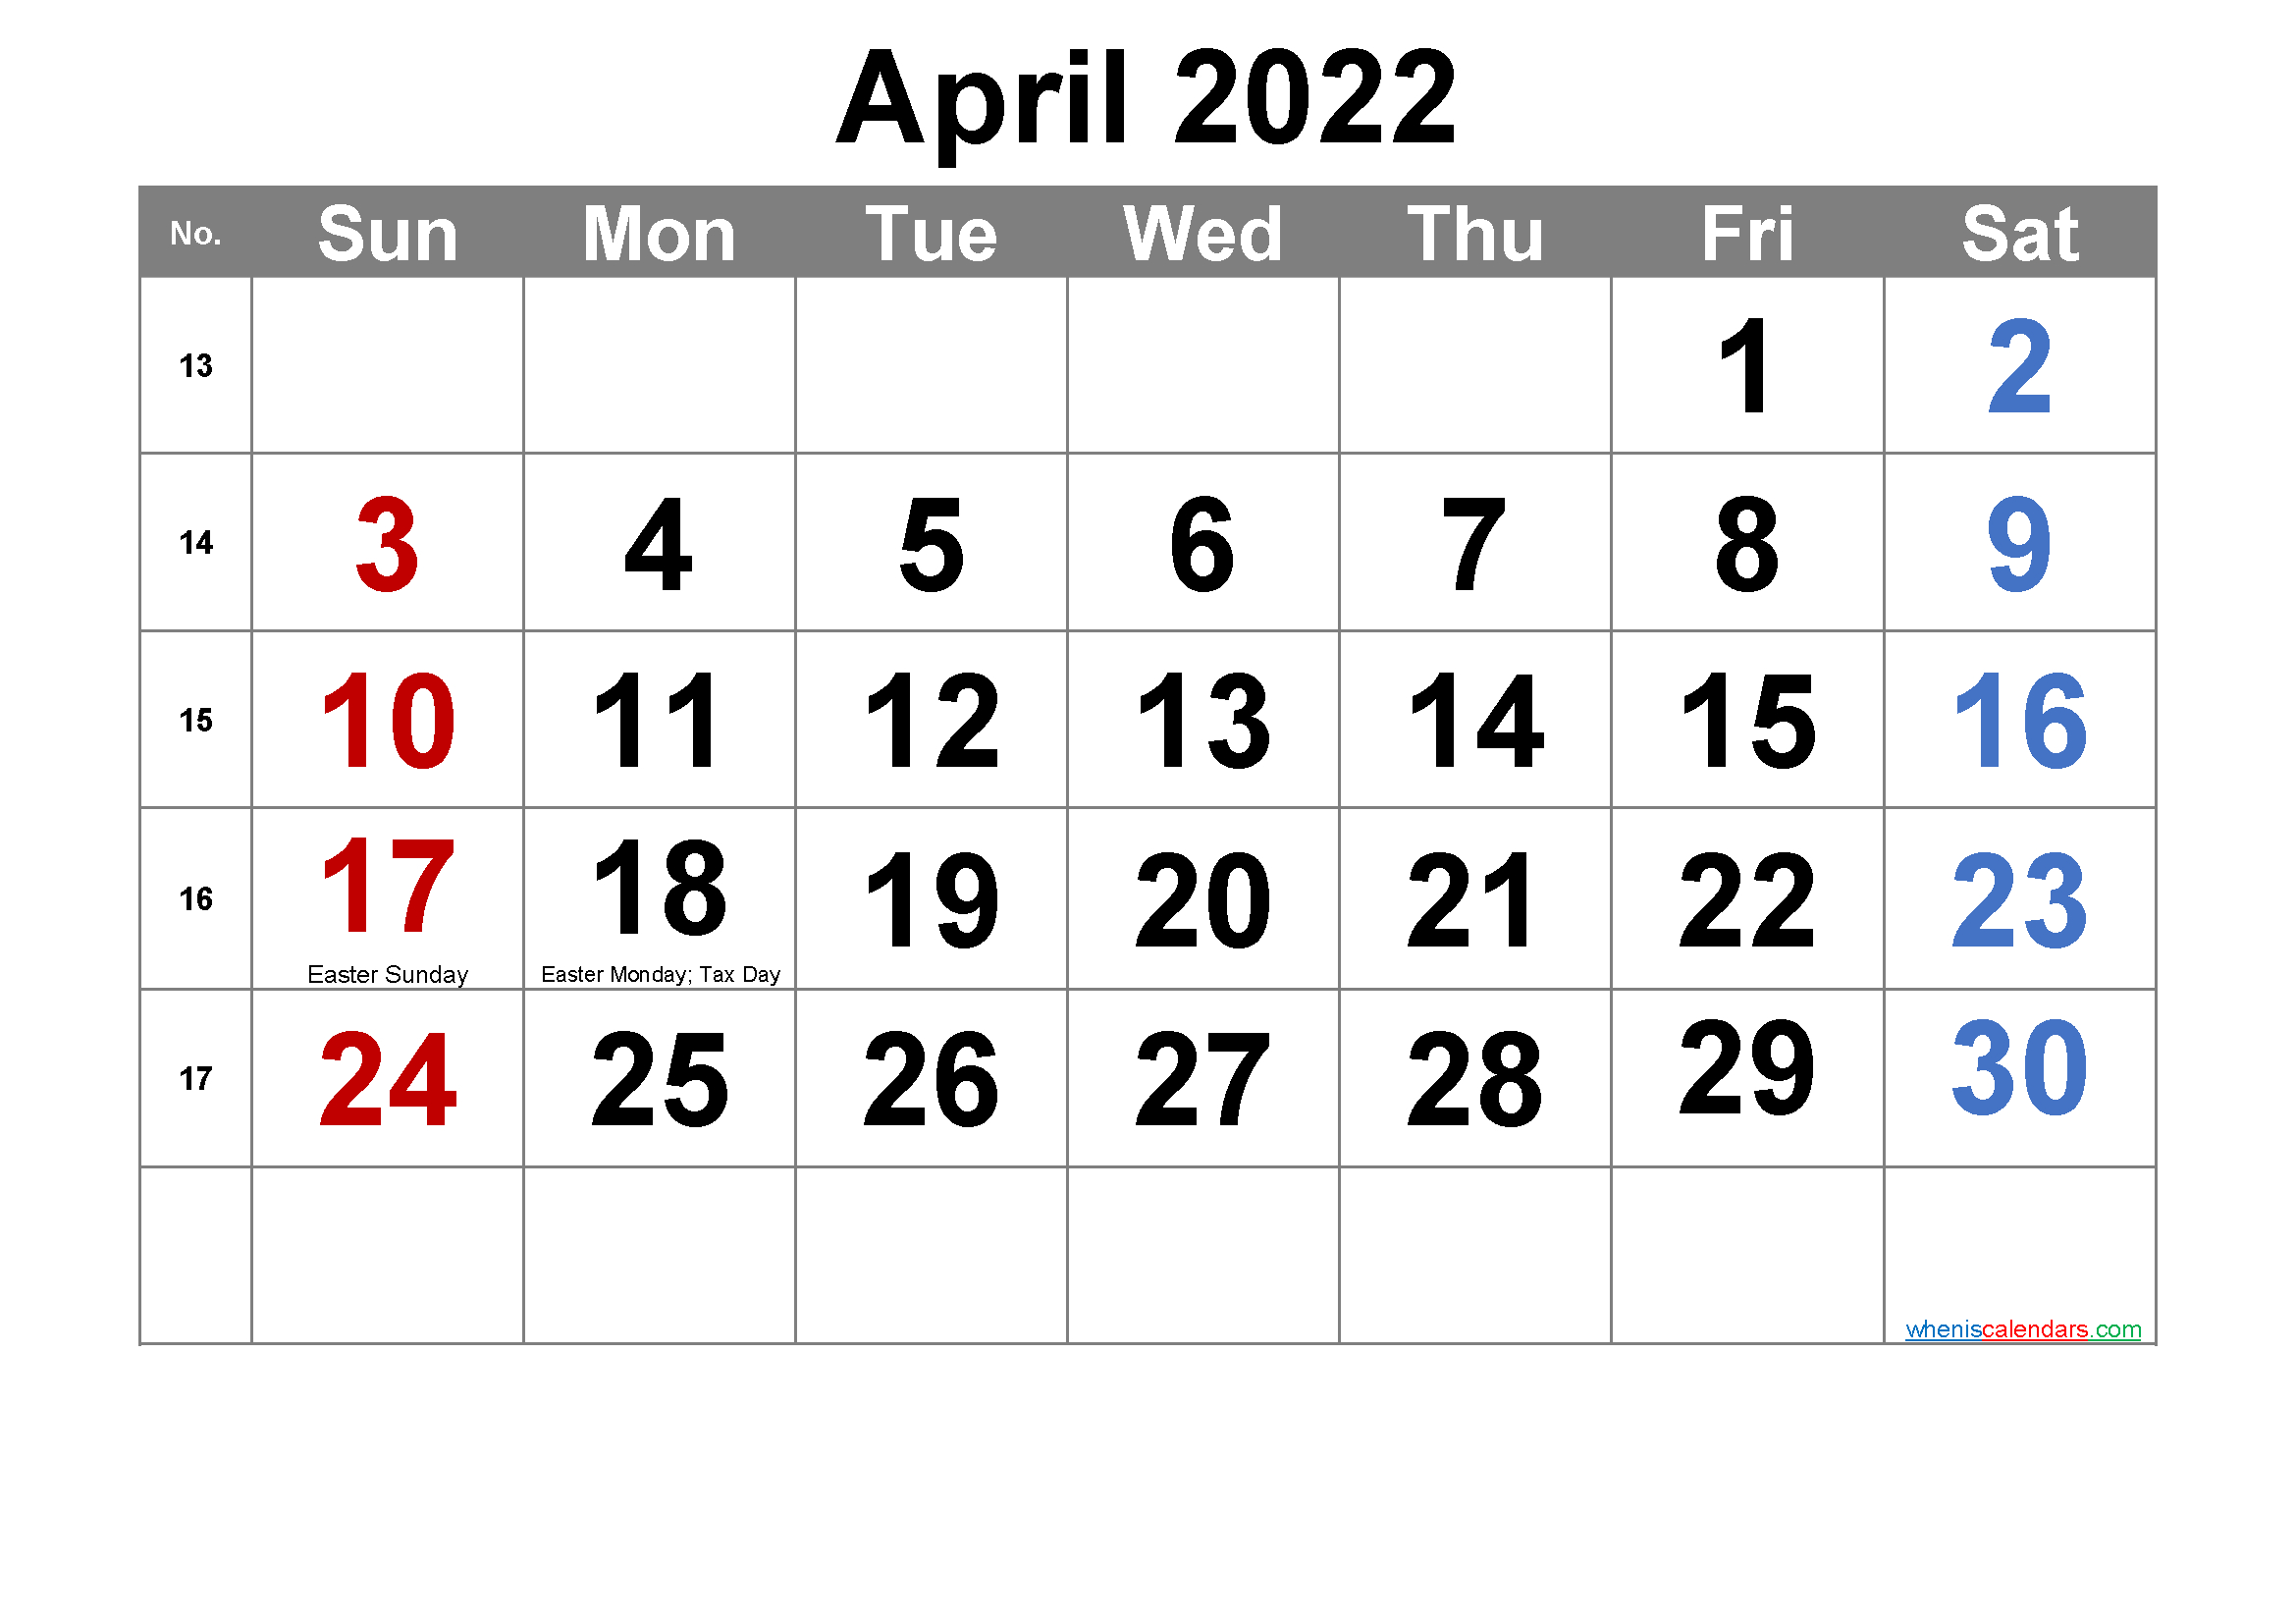 Calendar For March And April 2022 With Holidays - Calendar  Calendar Of March And April 2022